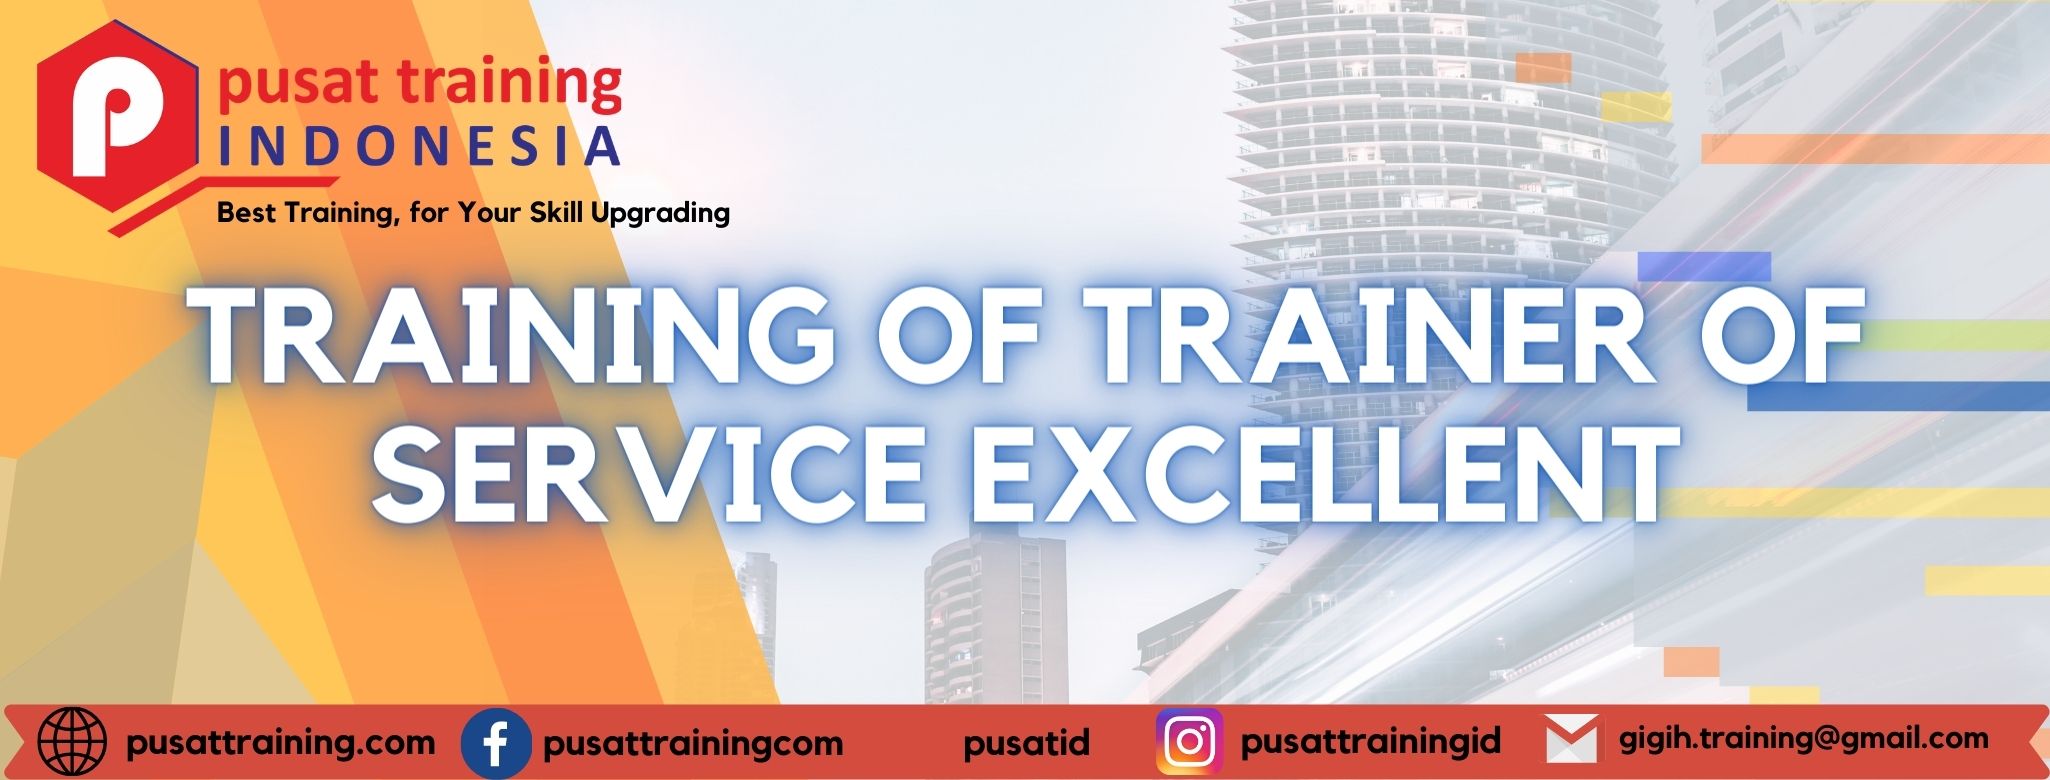 training-of-trainer-of-service-excellent